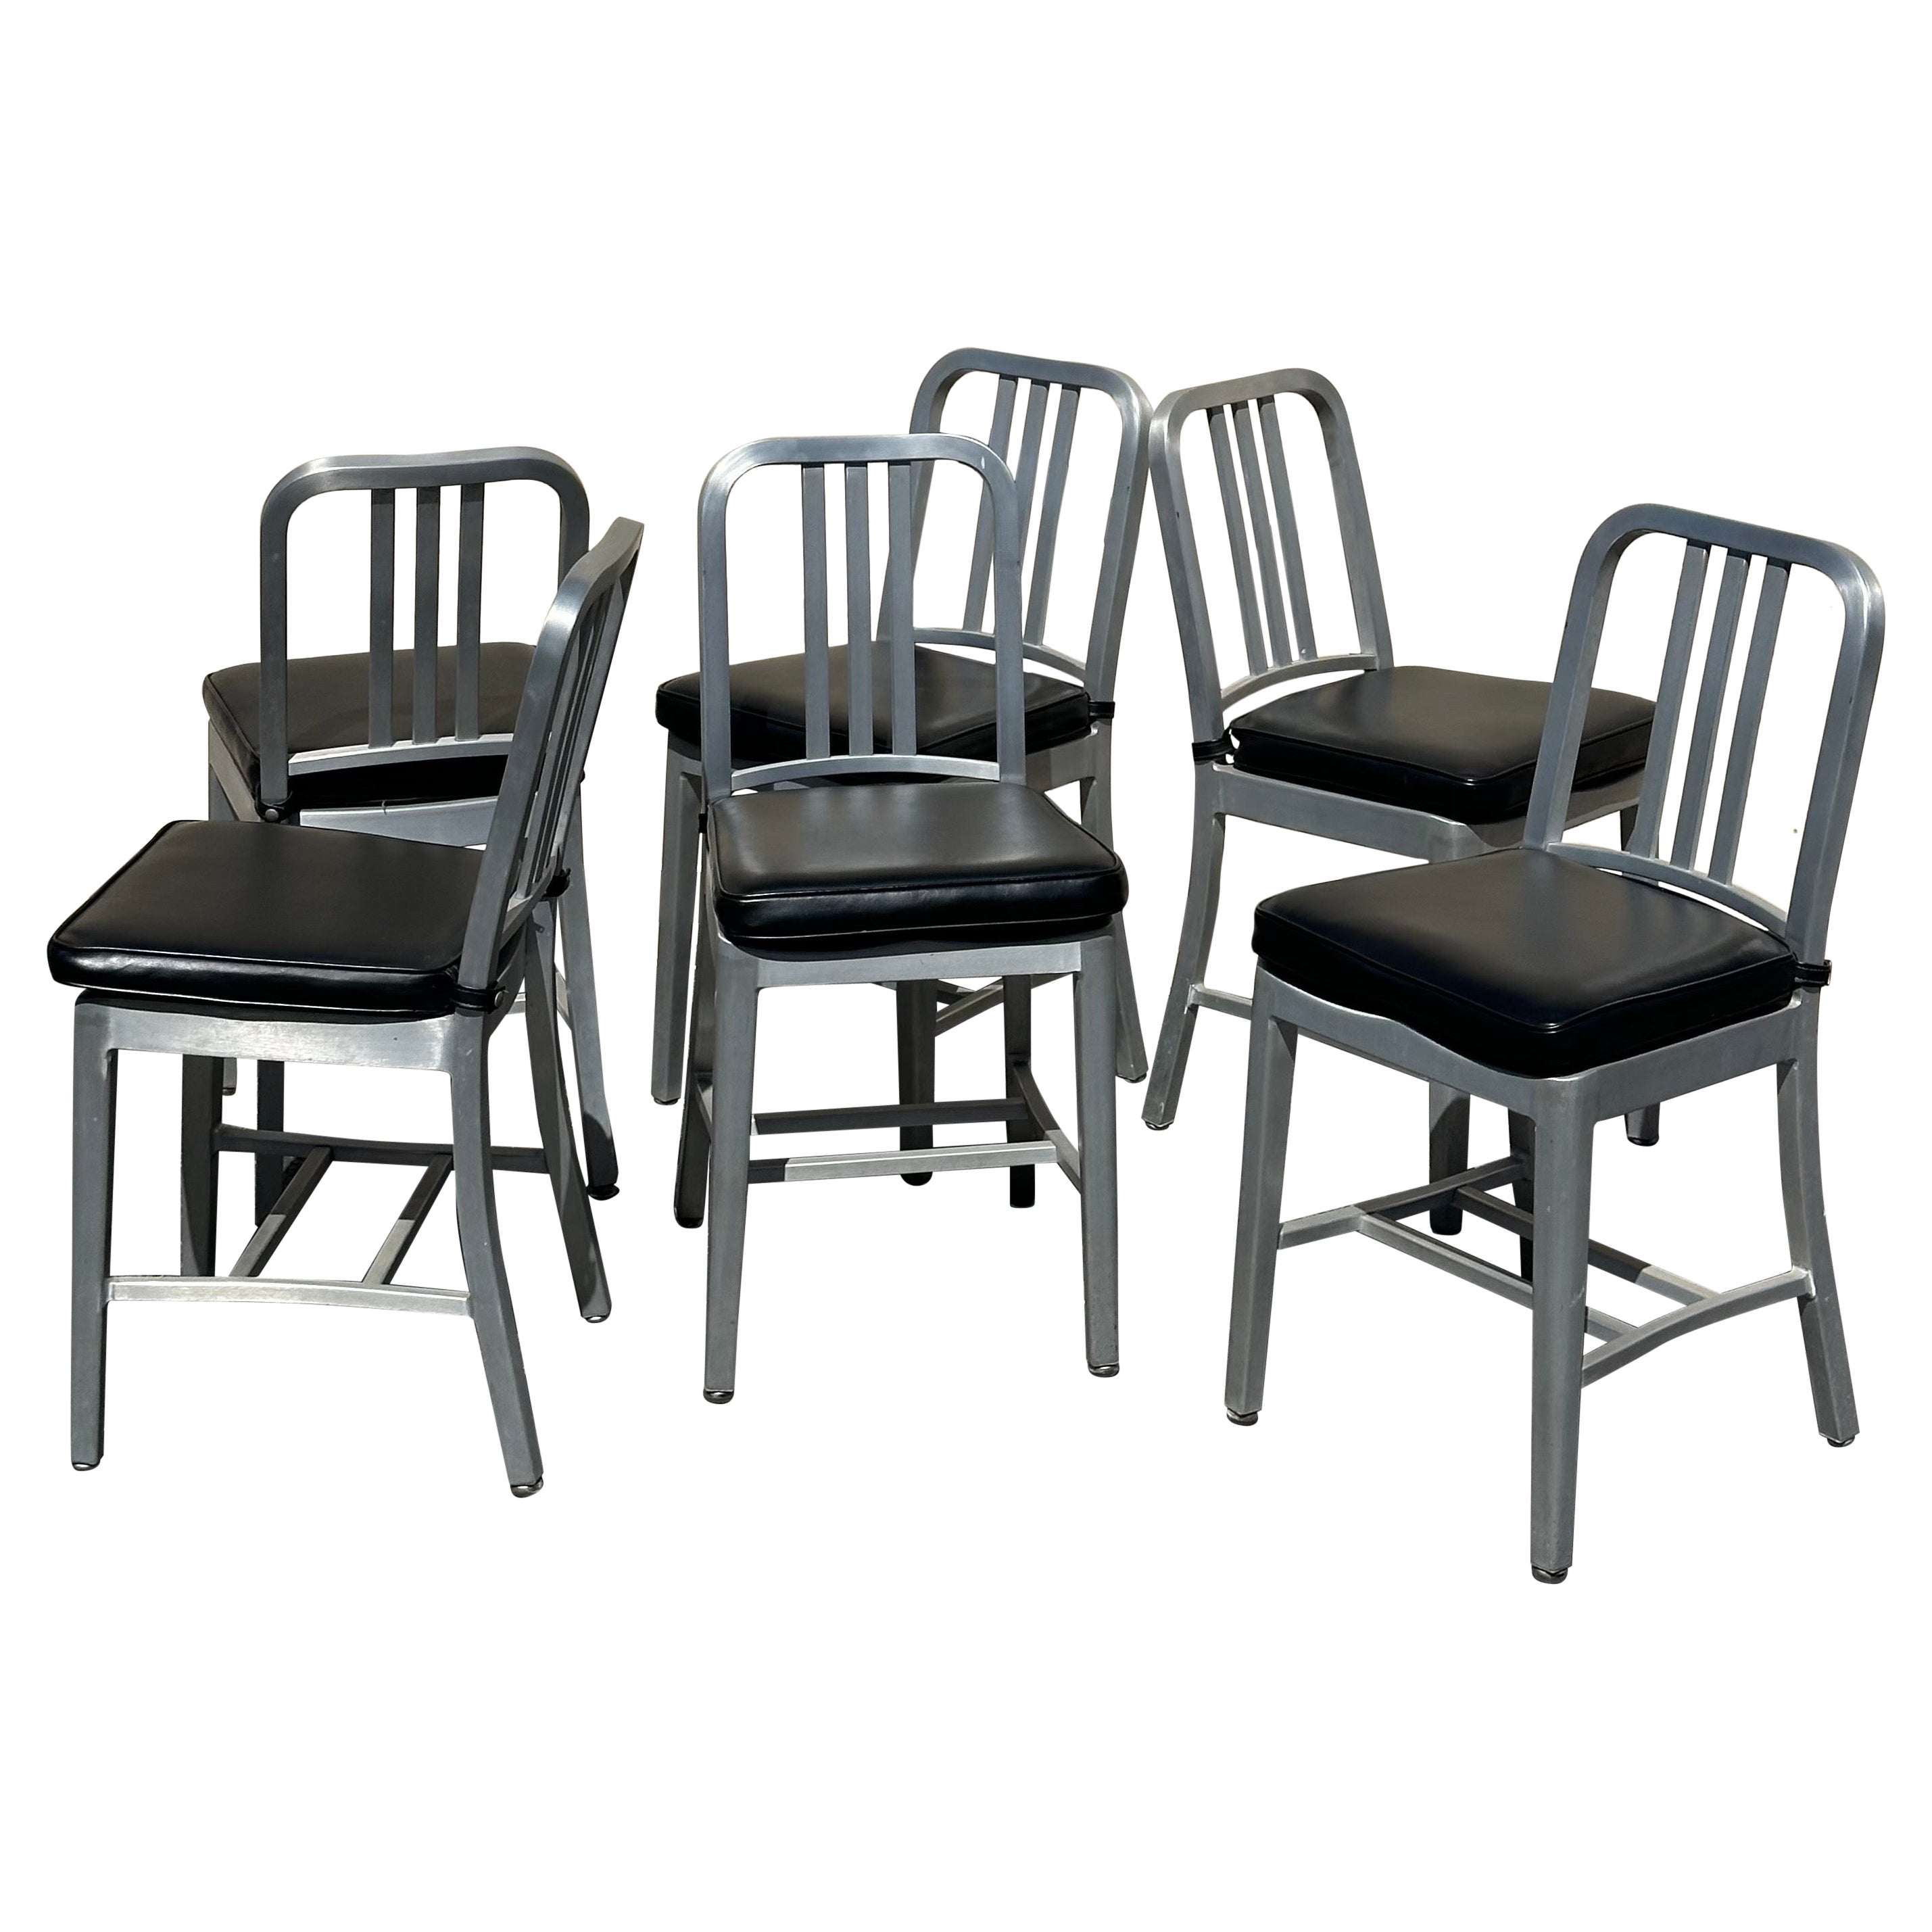 Set of Six Brushed Aluminum #111 "Navy" Chairs  by Emeco with Cushion For Sale